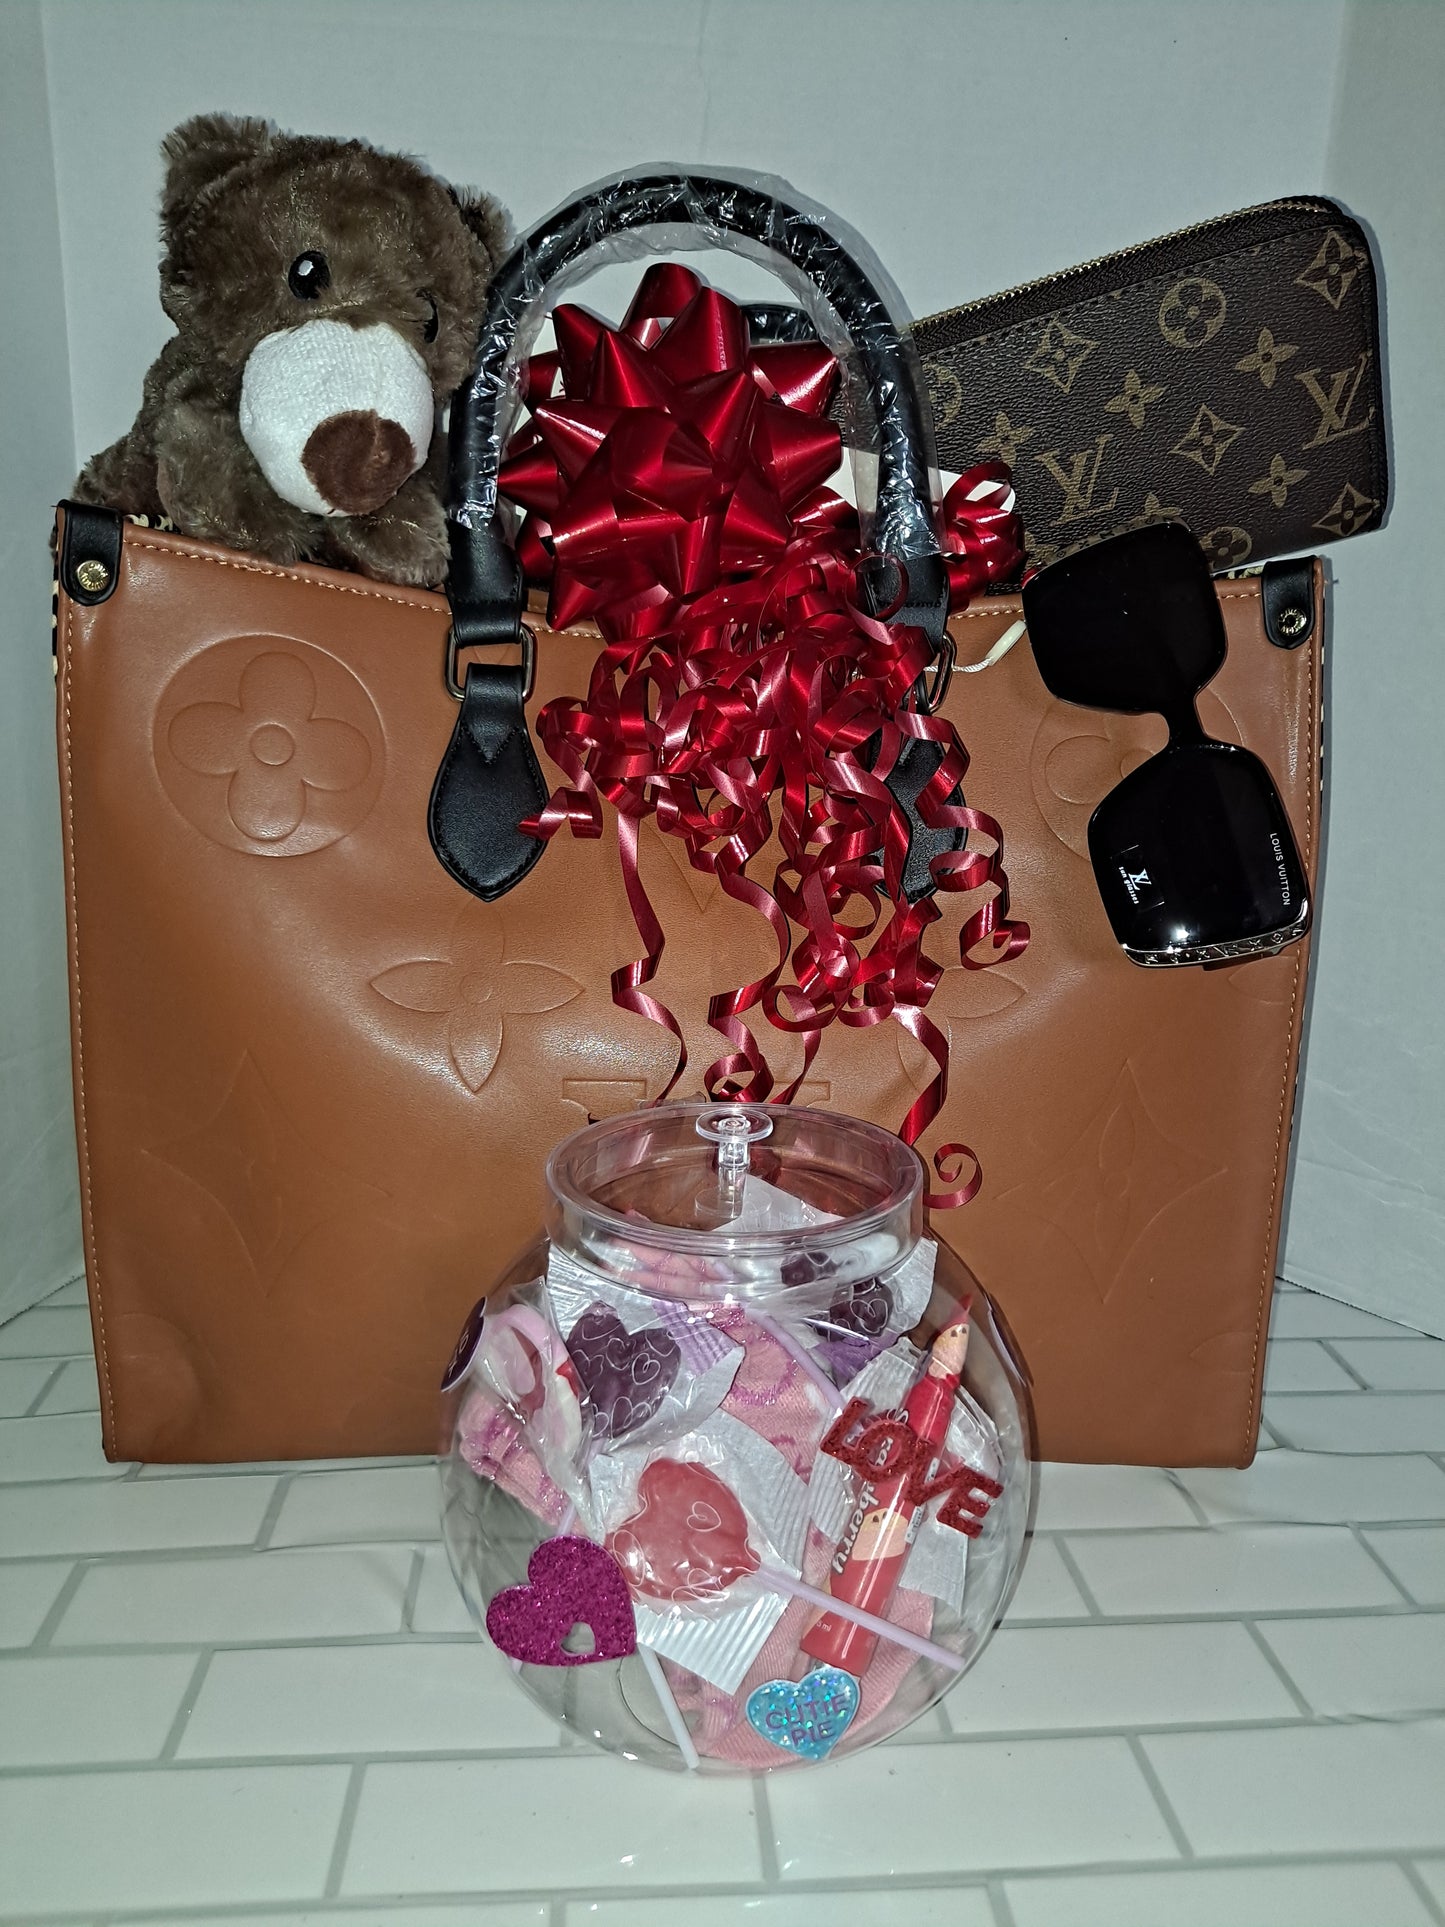 HOLIDAYS BAGS GIFT BASKETS